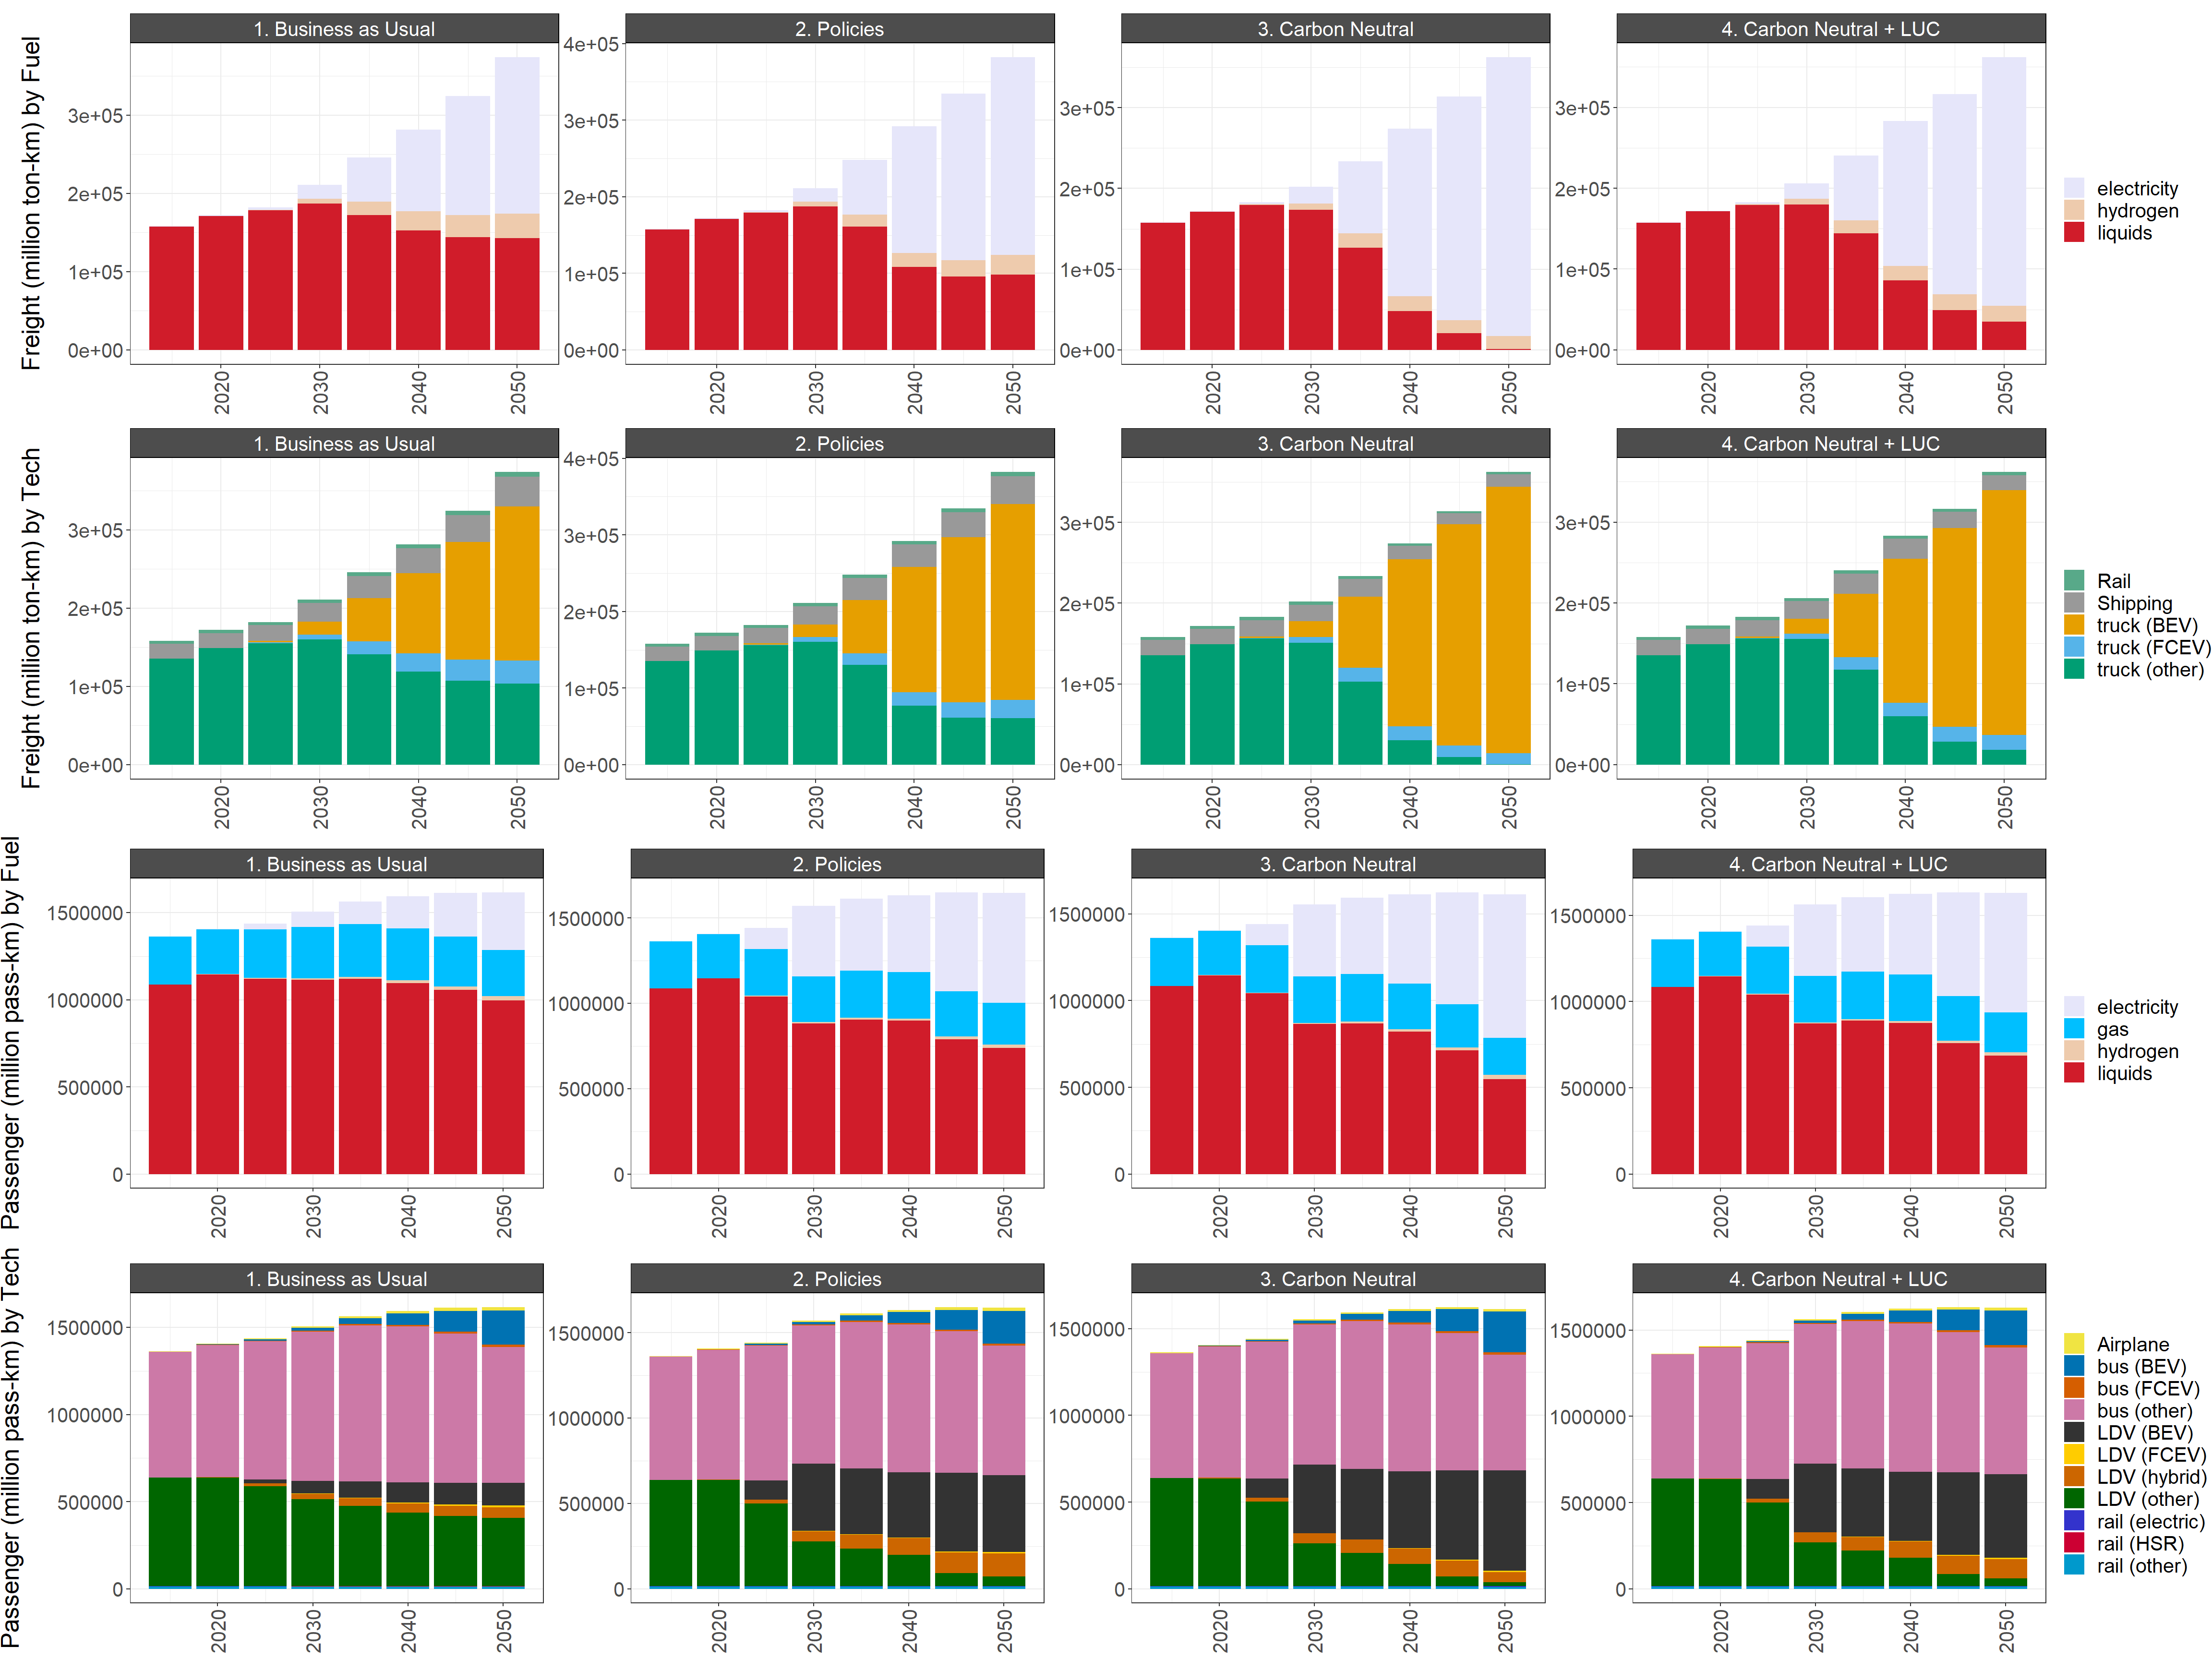 National transportation GHG emissions by mode and service output by mode and fuel in the reference scenario and the low and high policies scenarios